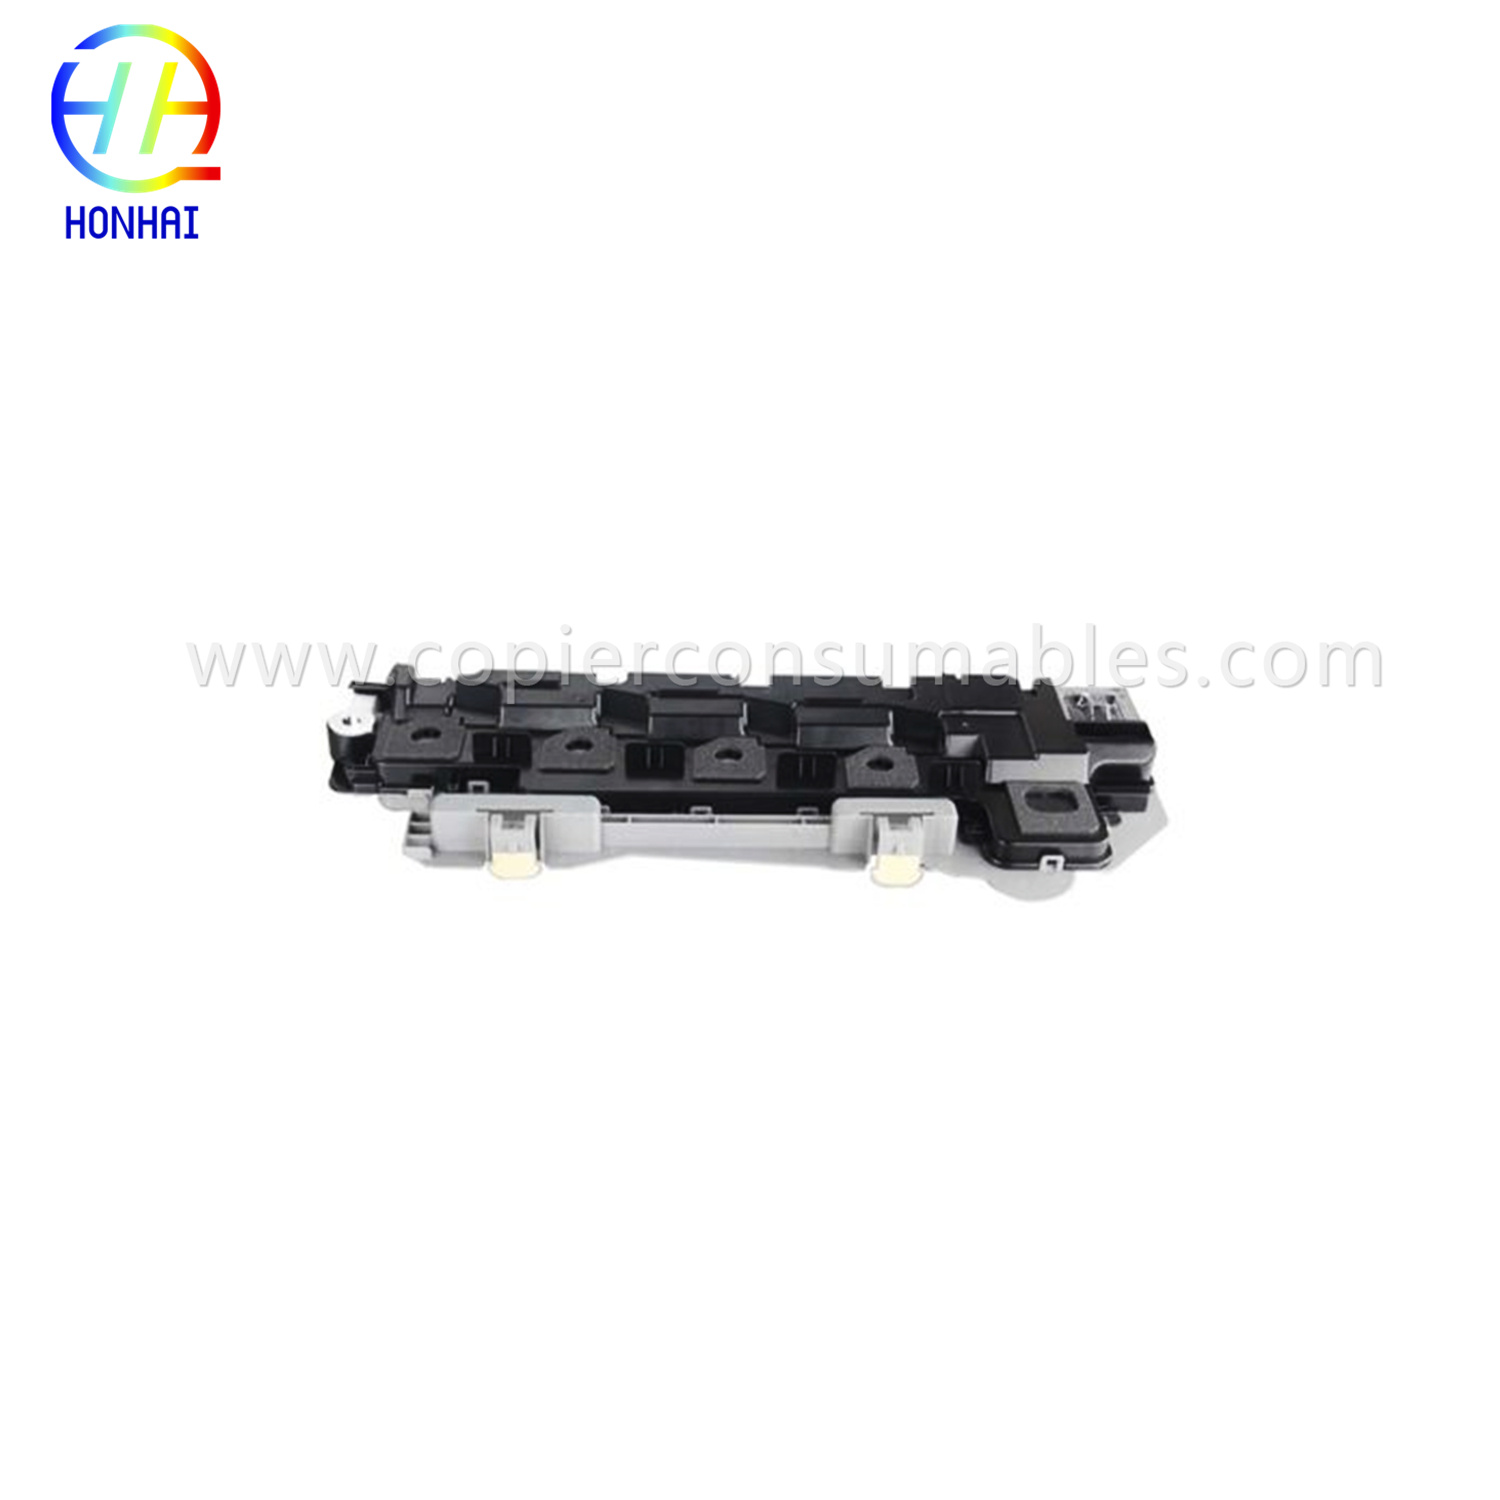 Waste Toner Container for Xerox Sc2020 Sc2021 2020 2021 (CWAA0869) OEM